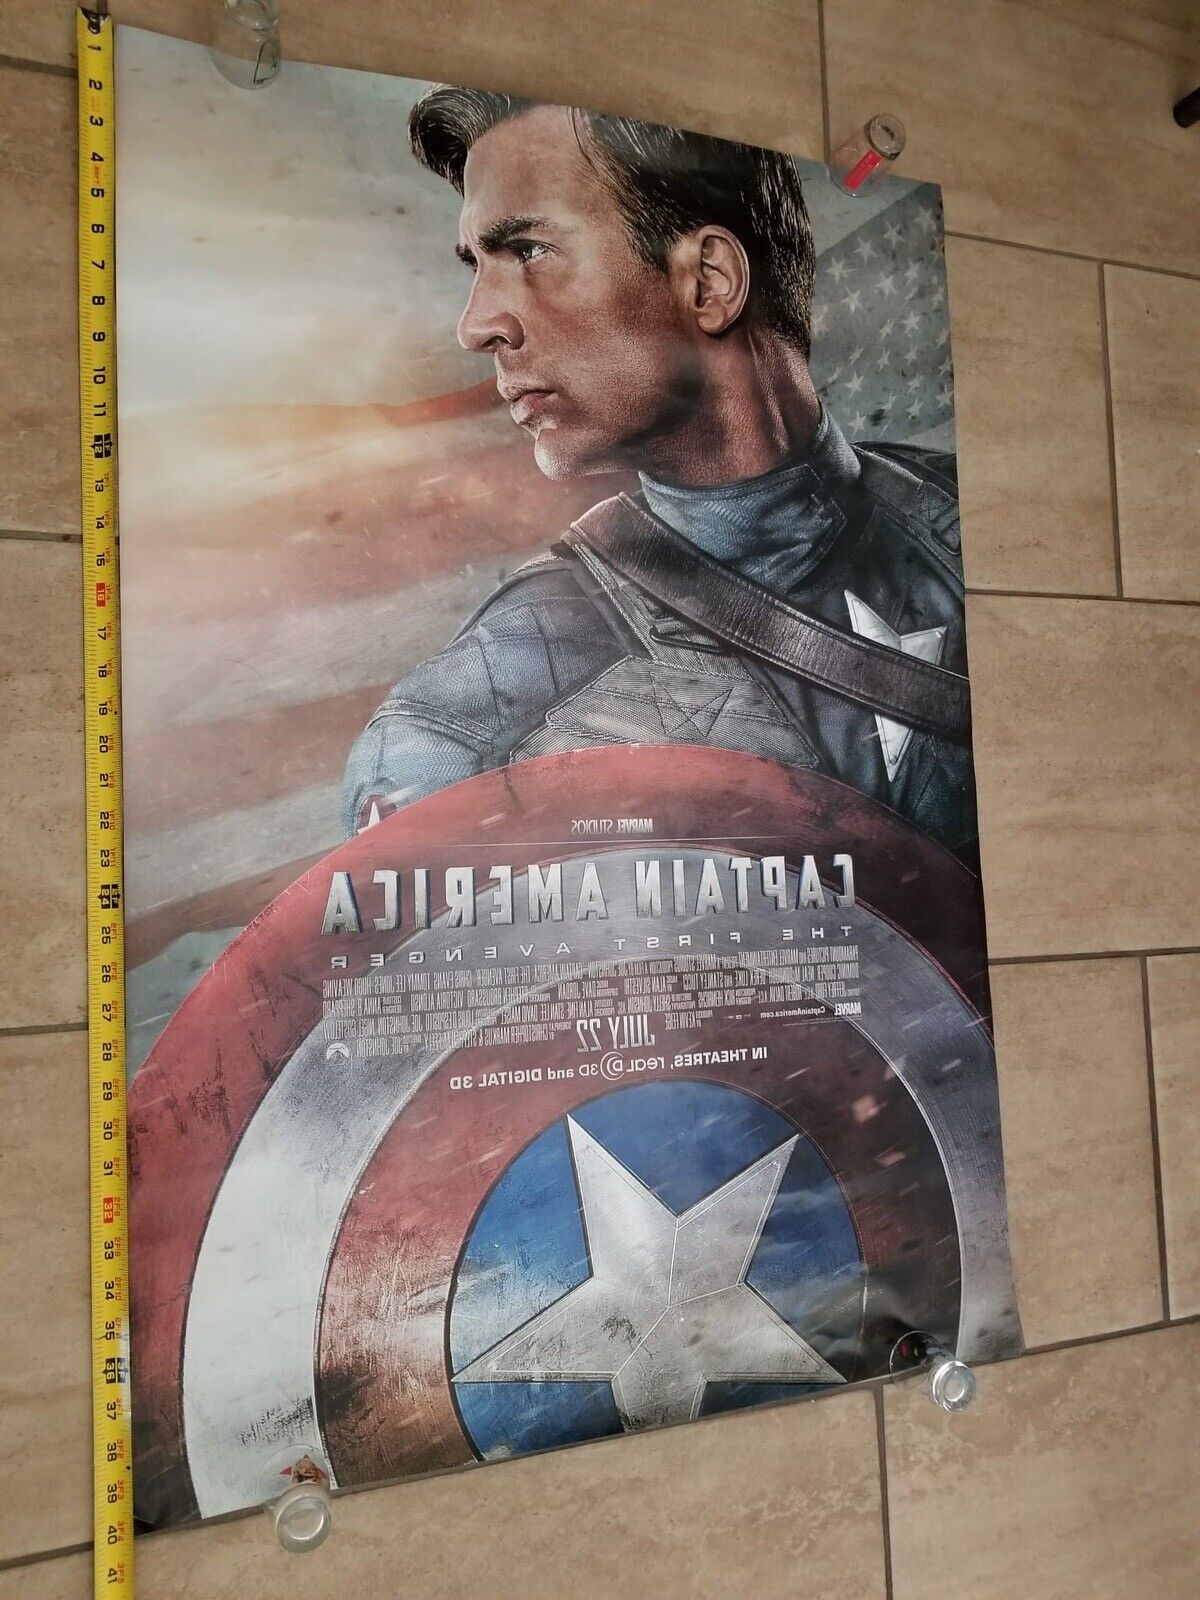 Rare Vintage Captain America Movie Marquee Poster - The First Avenger (2011), 40x27 - TreasuTiques